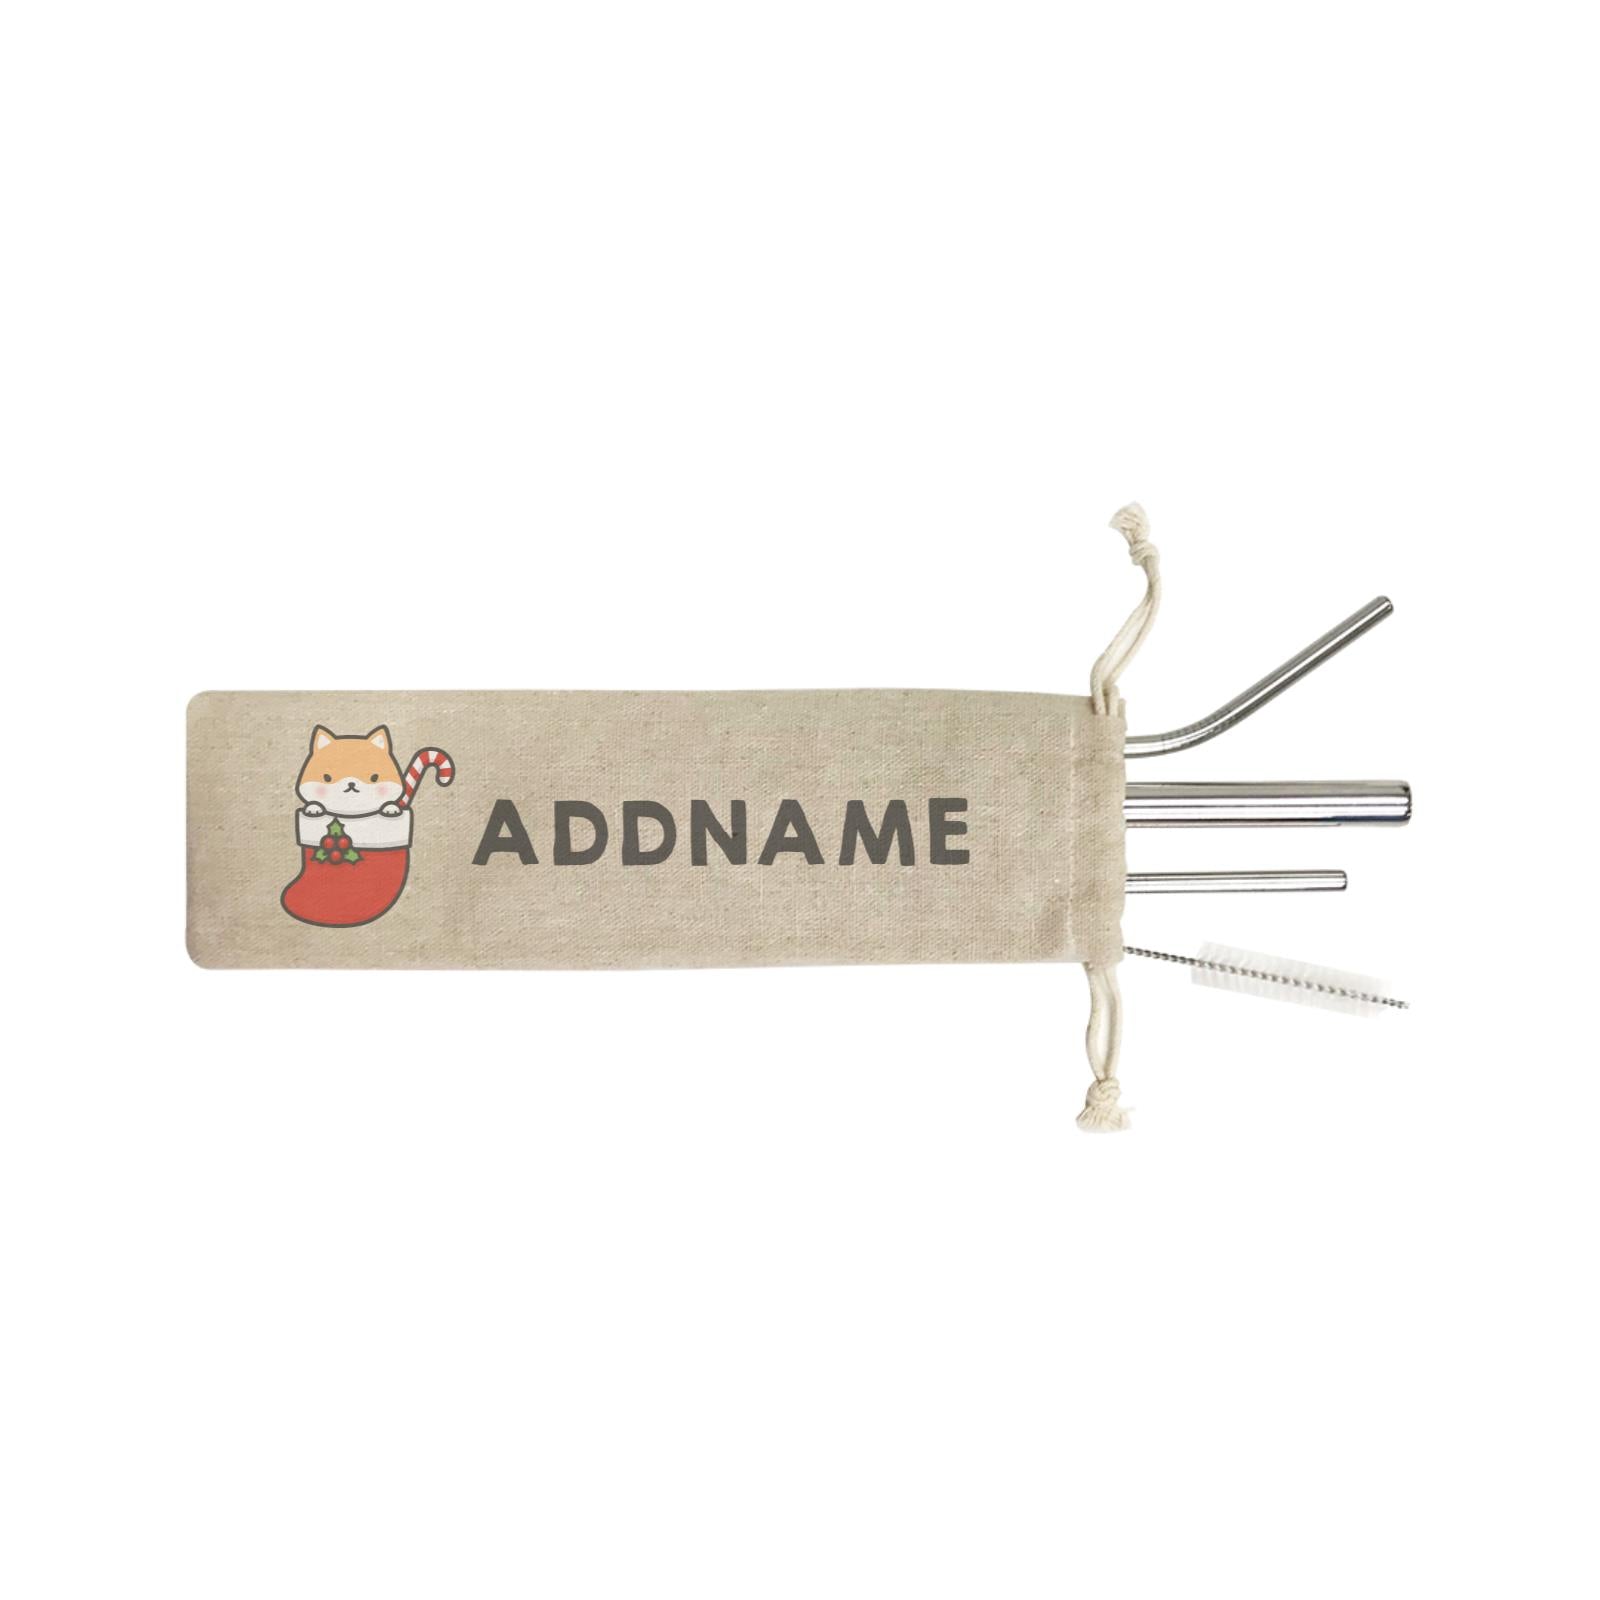 Xmas Cute Dog In Christmas Sock Addname SB 4-in-1 Stainless Steel Straw Set In a Satchel